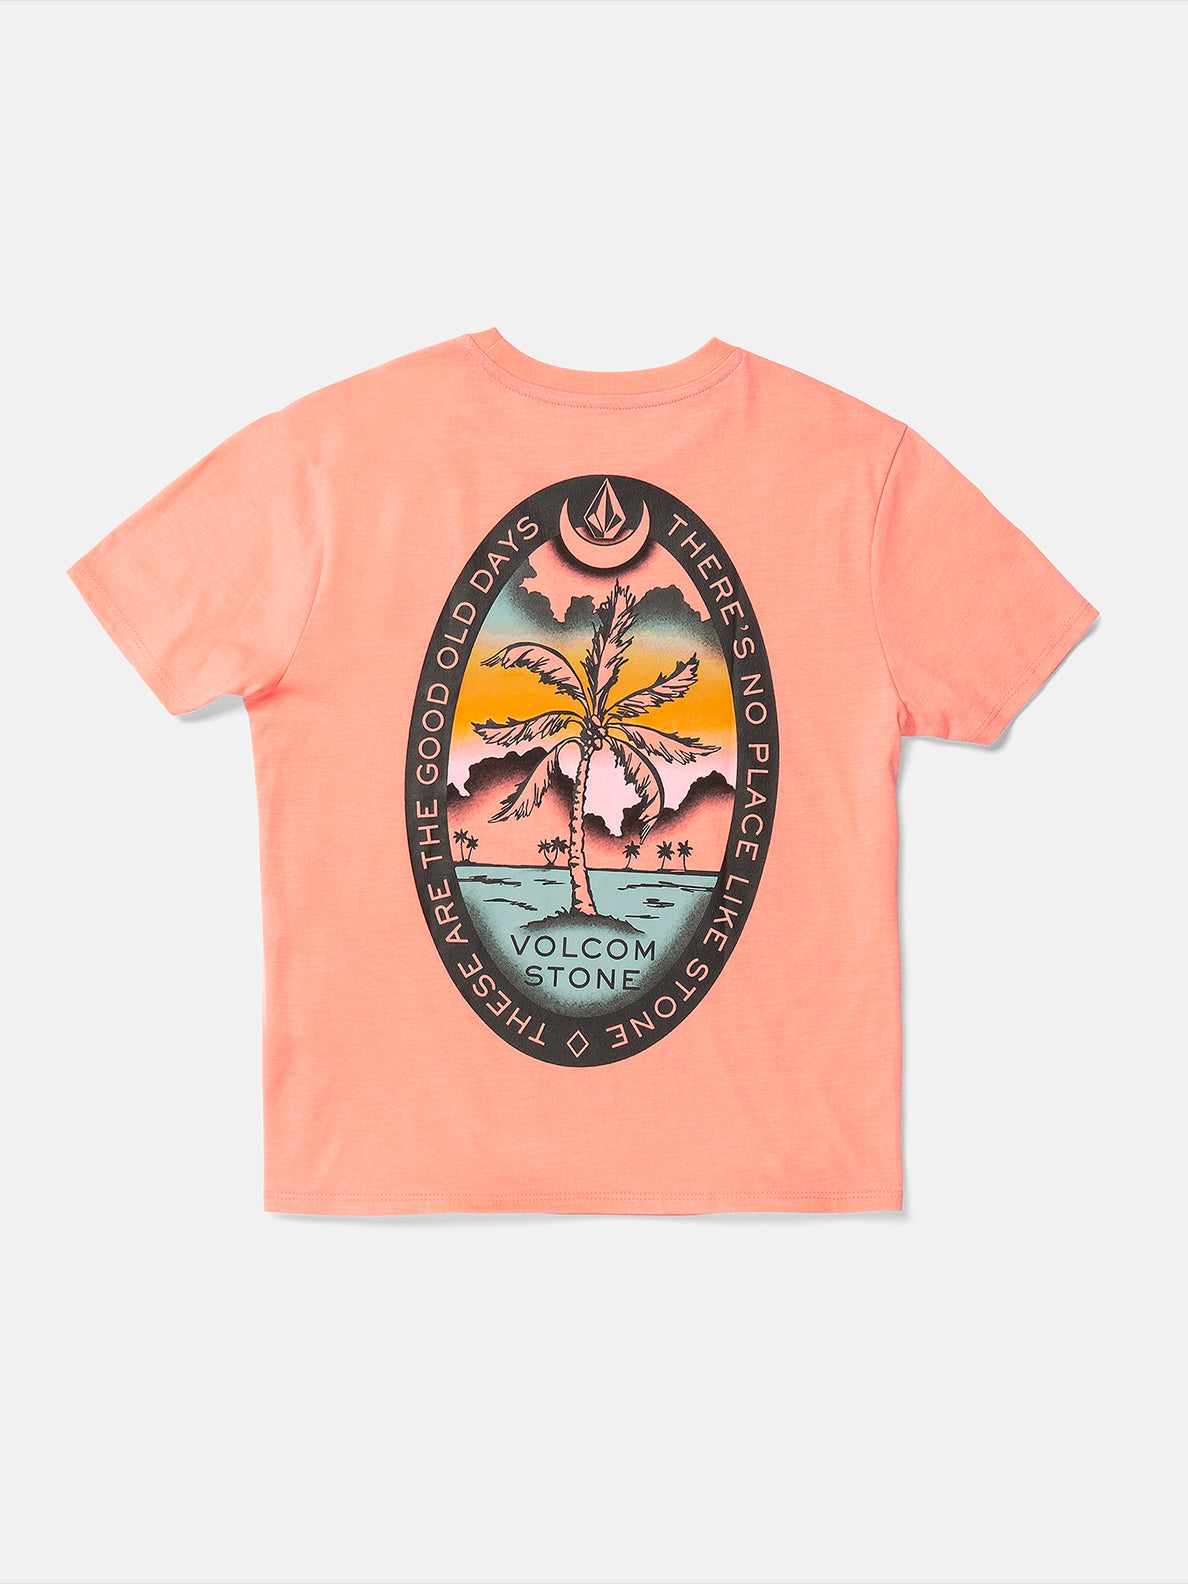 Girls Truly Stoked Bf Tee - Reef Pink